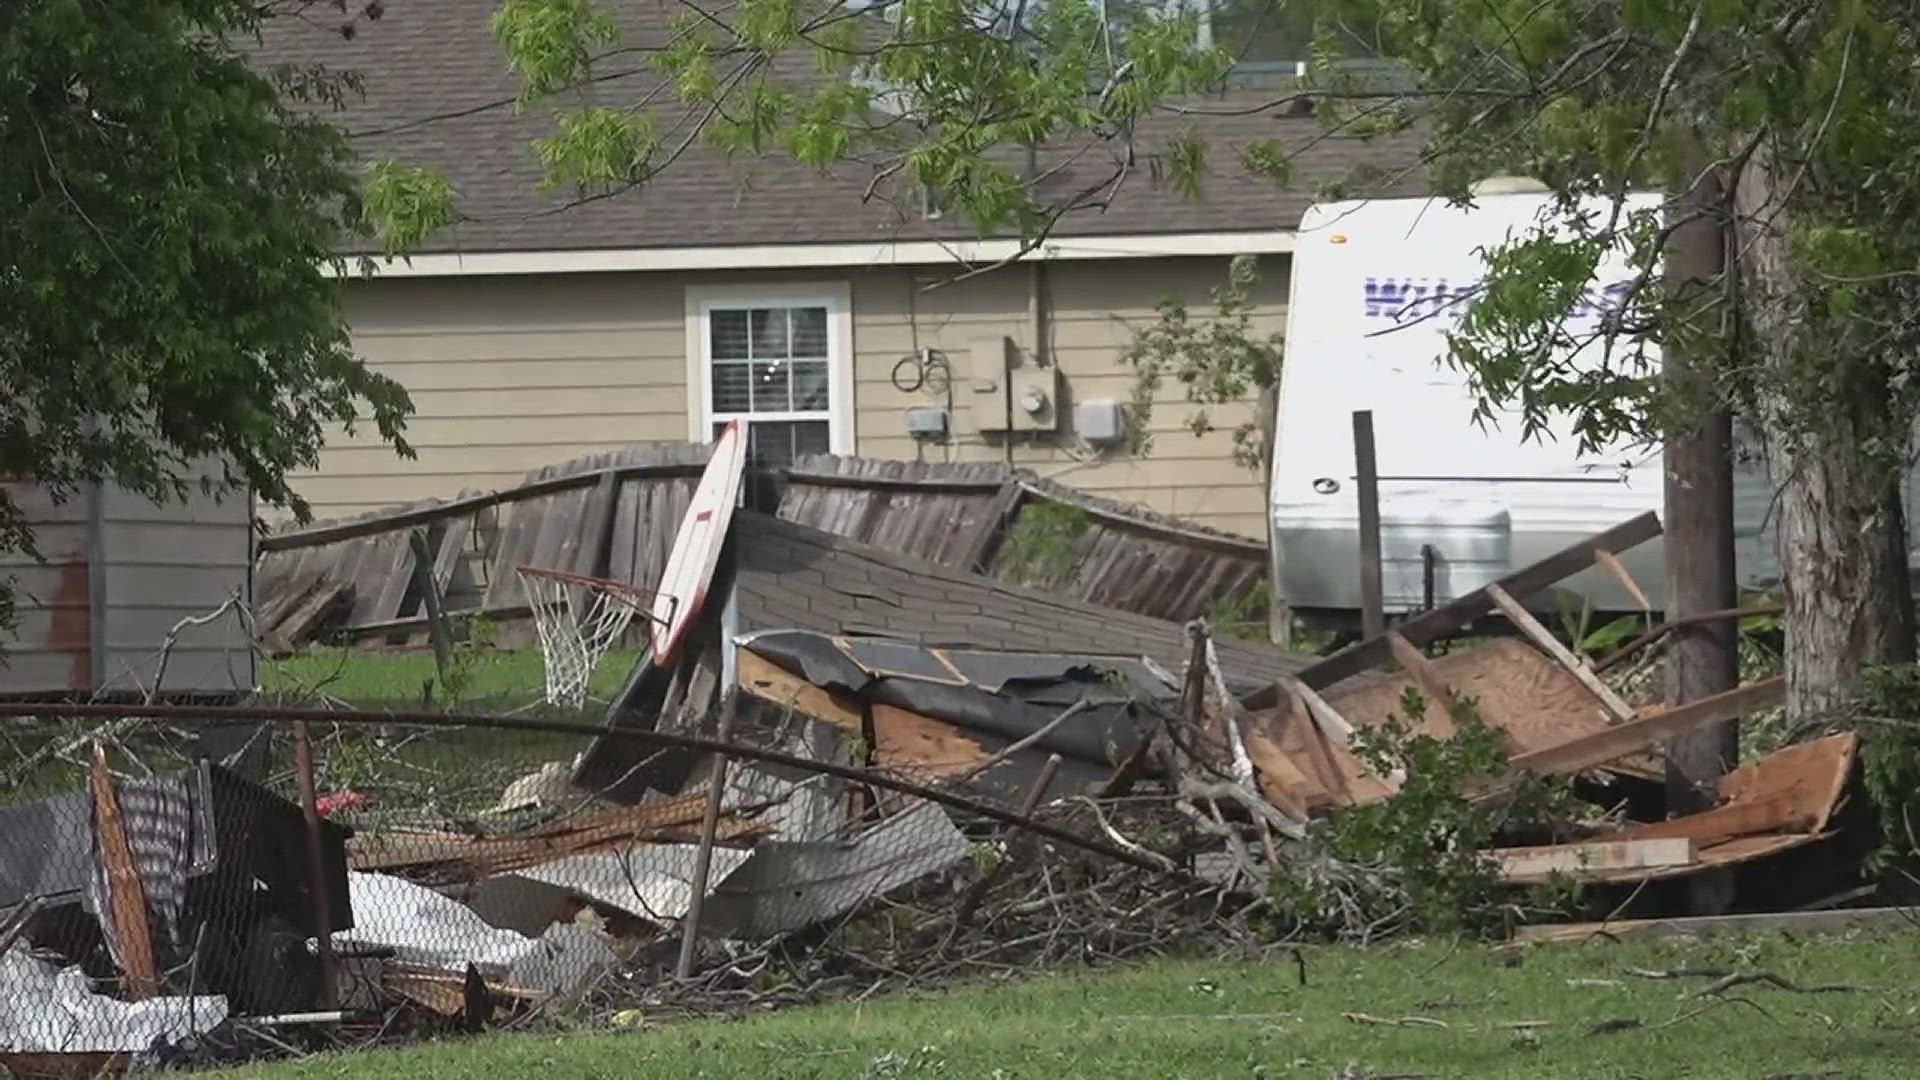 A Port Arthur woman's home was significantly damaged by an EF-2 tornado.